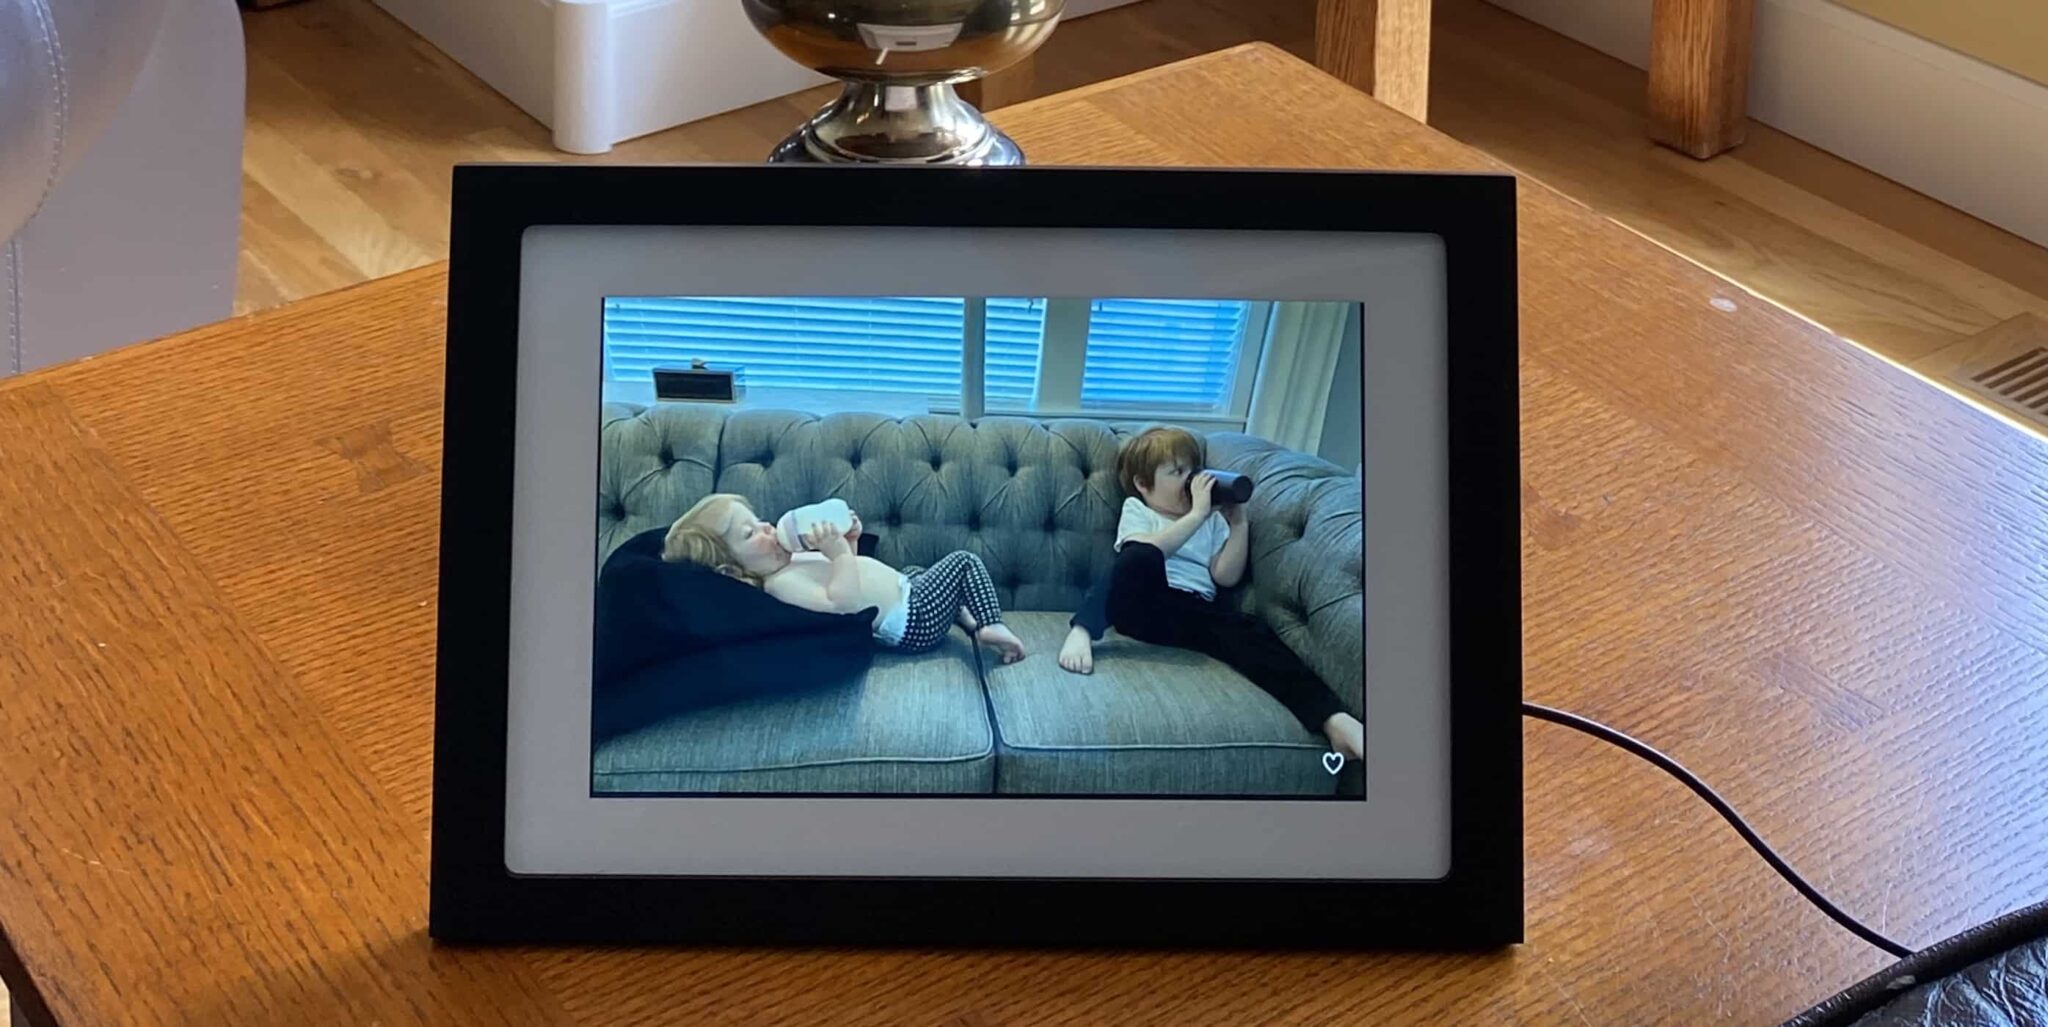 Skylight Frame Review The Very Best WiFi Picture Frame?